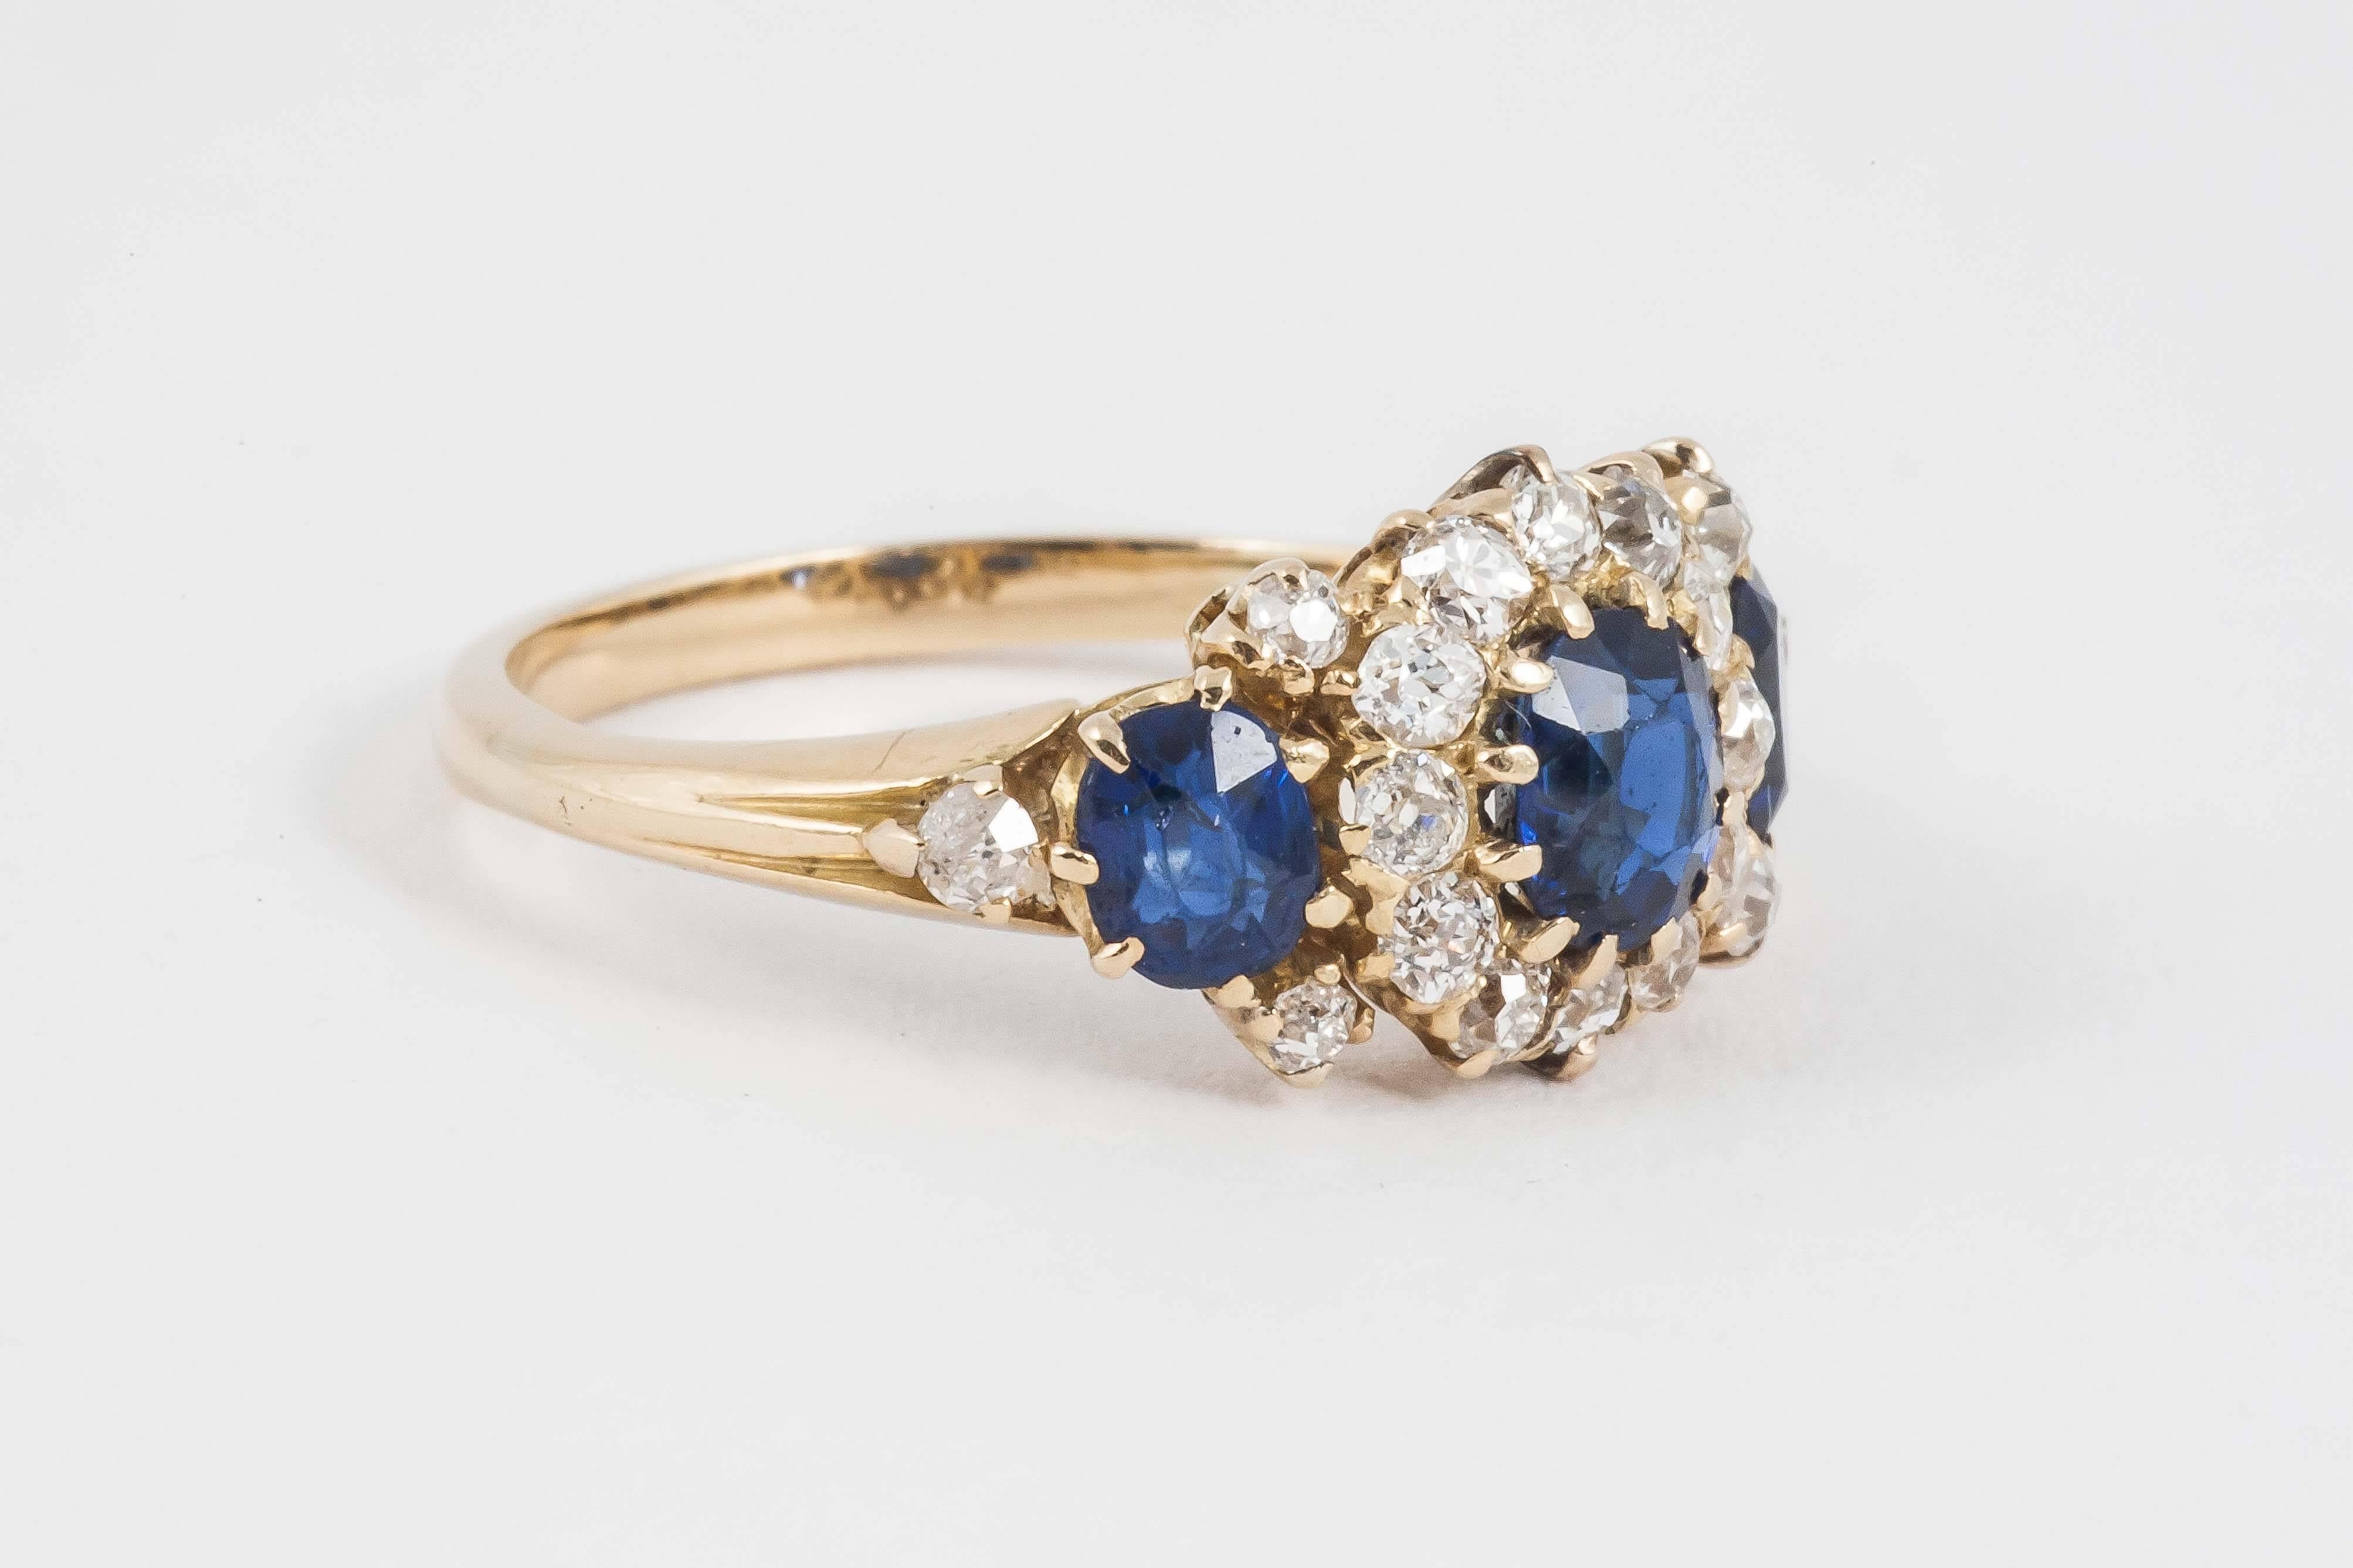 A 19th century, ceylon sapphire 3 stone ring set with old cut brilliant diamonds,mounted in 18ct gold.c,1880